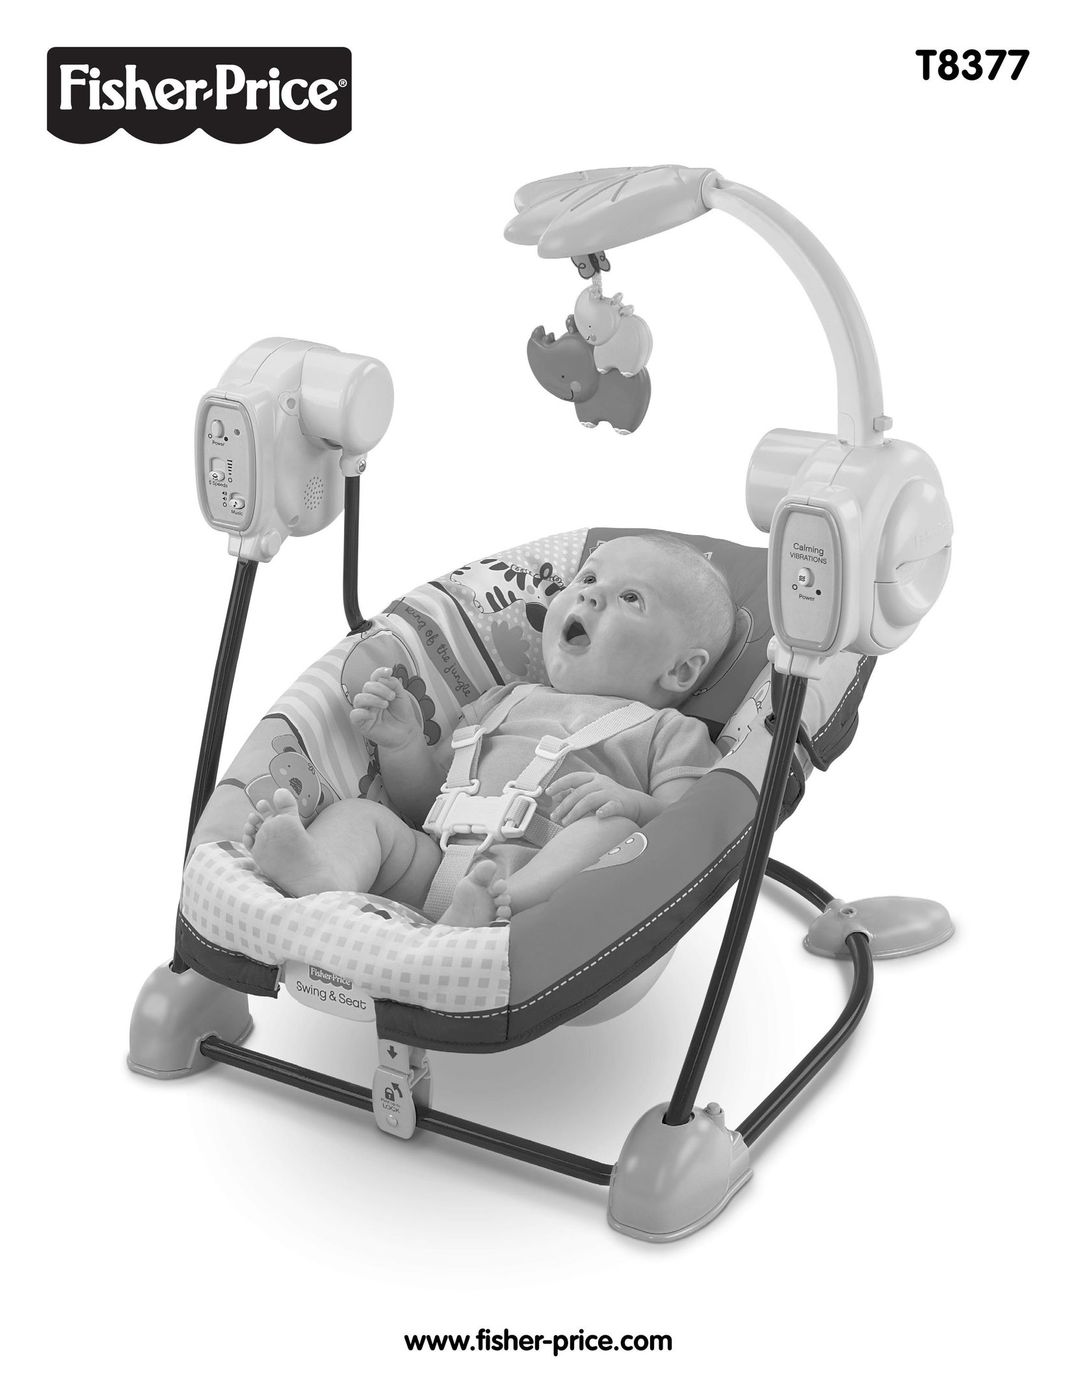 Fisher-Price T8377 Baby Accessories User Manual (Page 1)